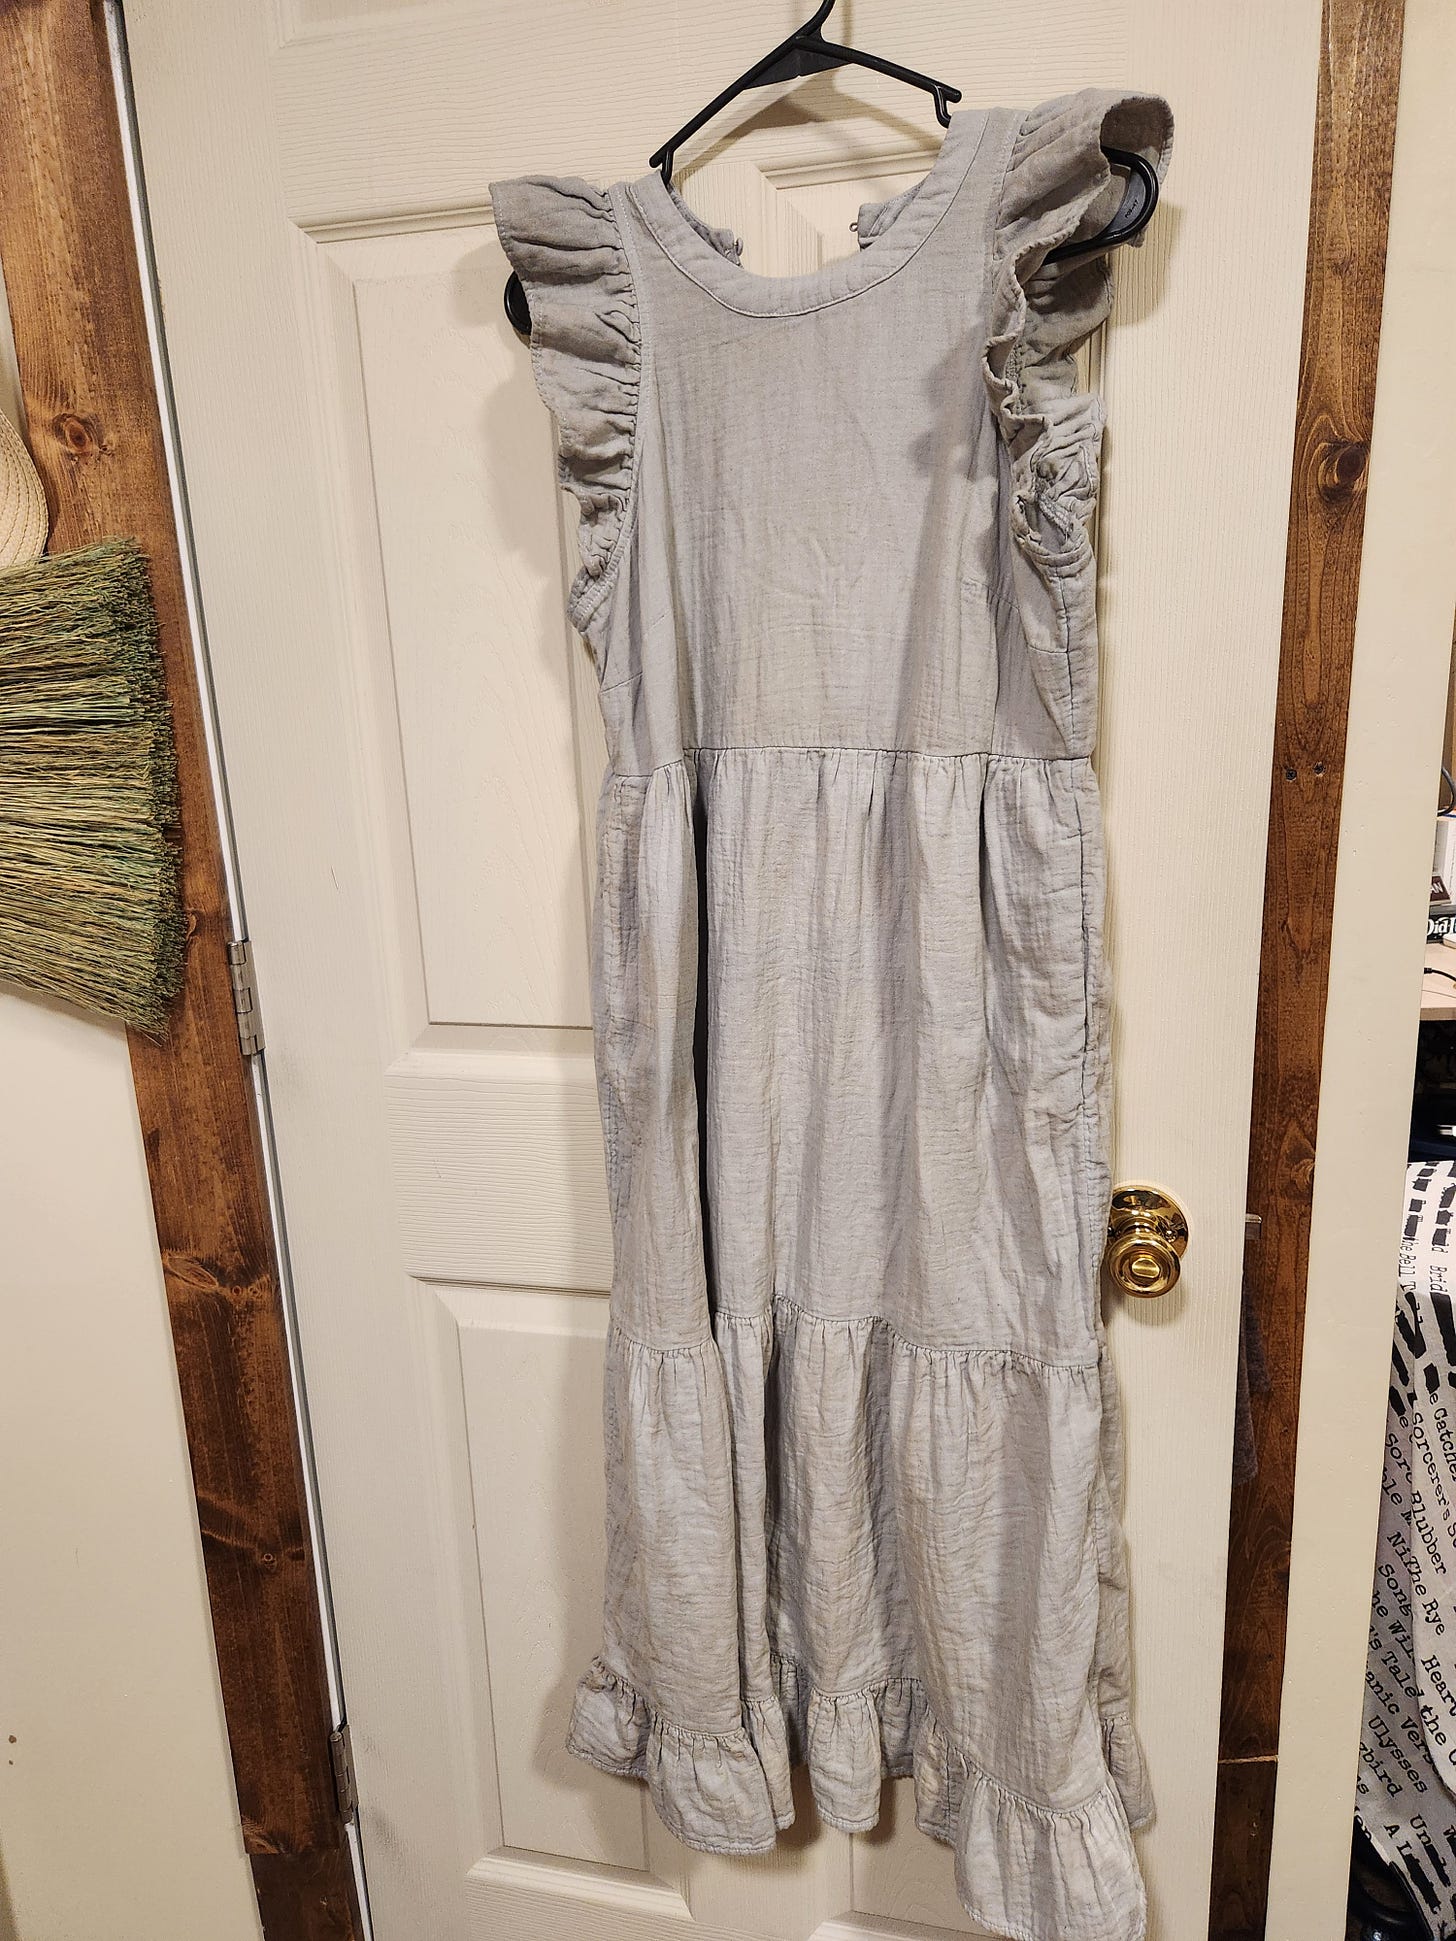 A formerly white dress, now light blue, is hanging up. It has a tiered skirt and ruffled cap sleeves.